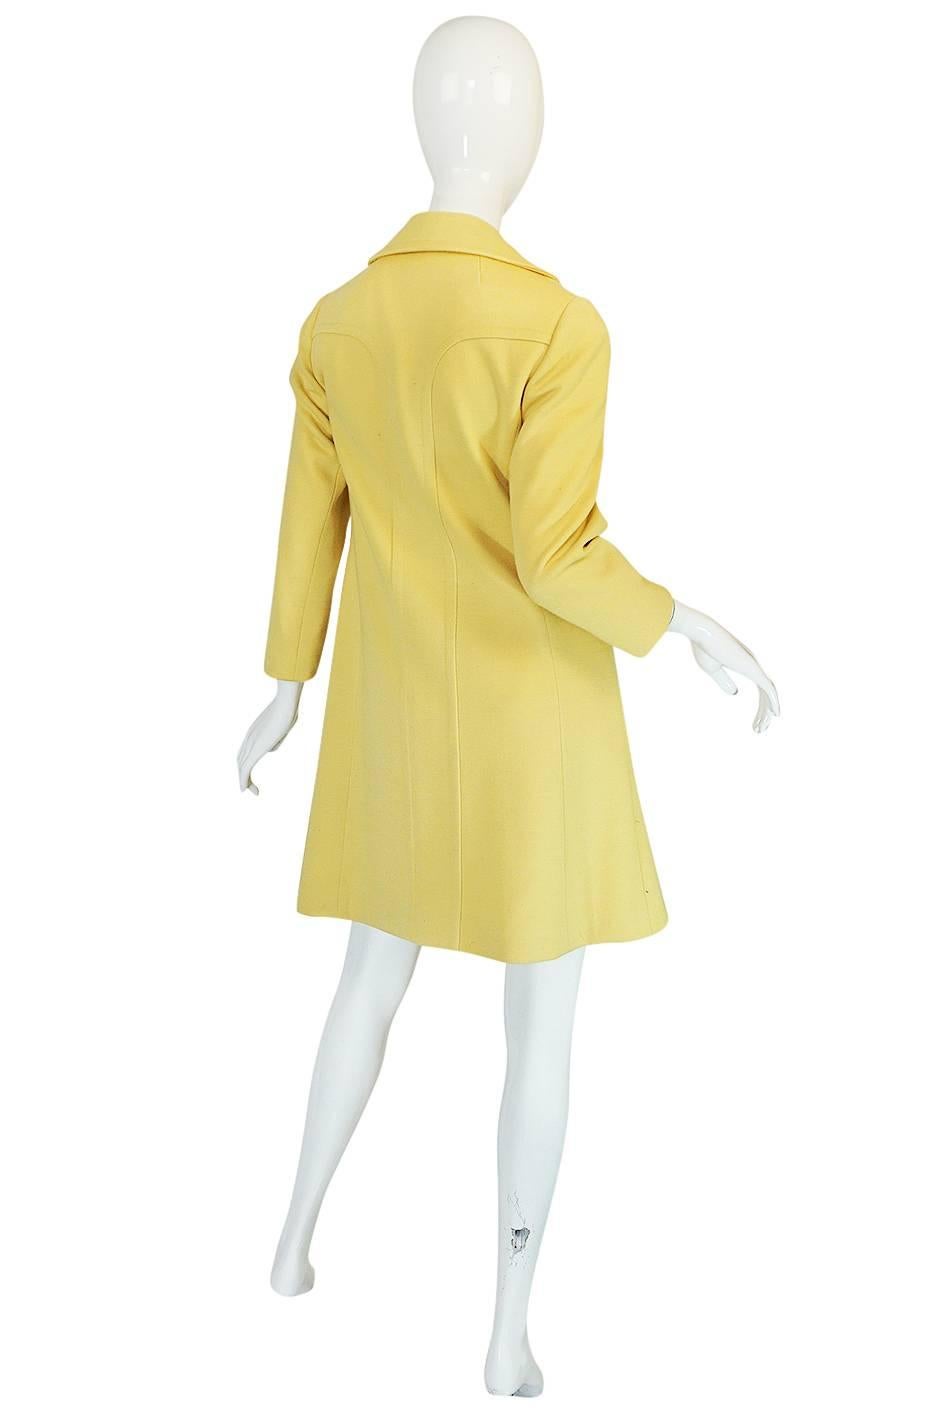 

What a gorgeous little coat that is so representative of the sixties. The fabric is just wonderful - it is a soft, pale yellow knit wool jersey that has enough weight to give it structure and hold the lines but without feeling too heavy when on.